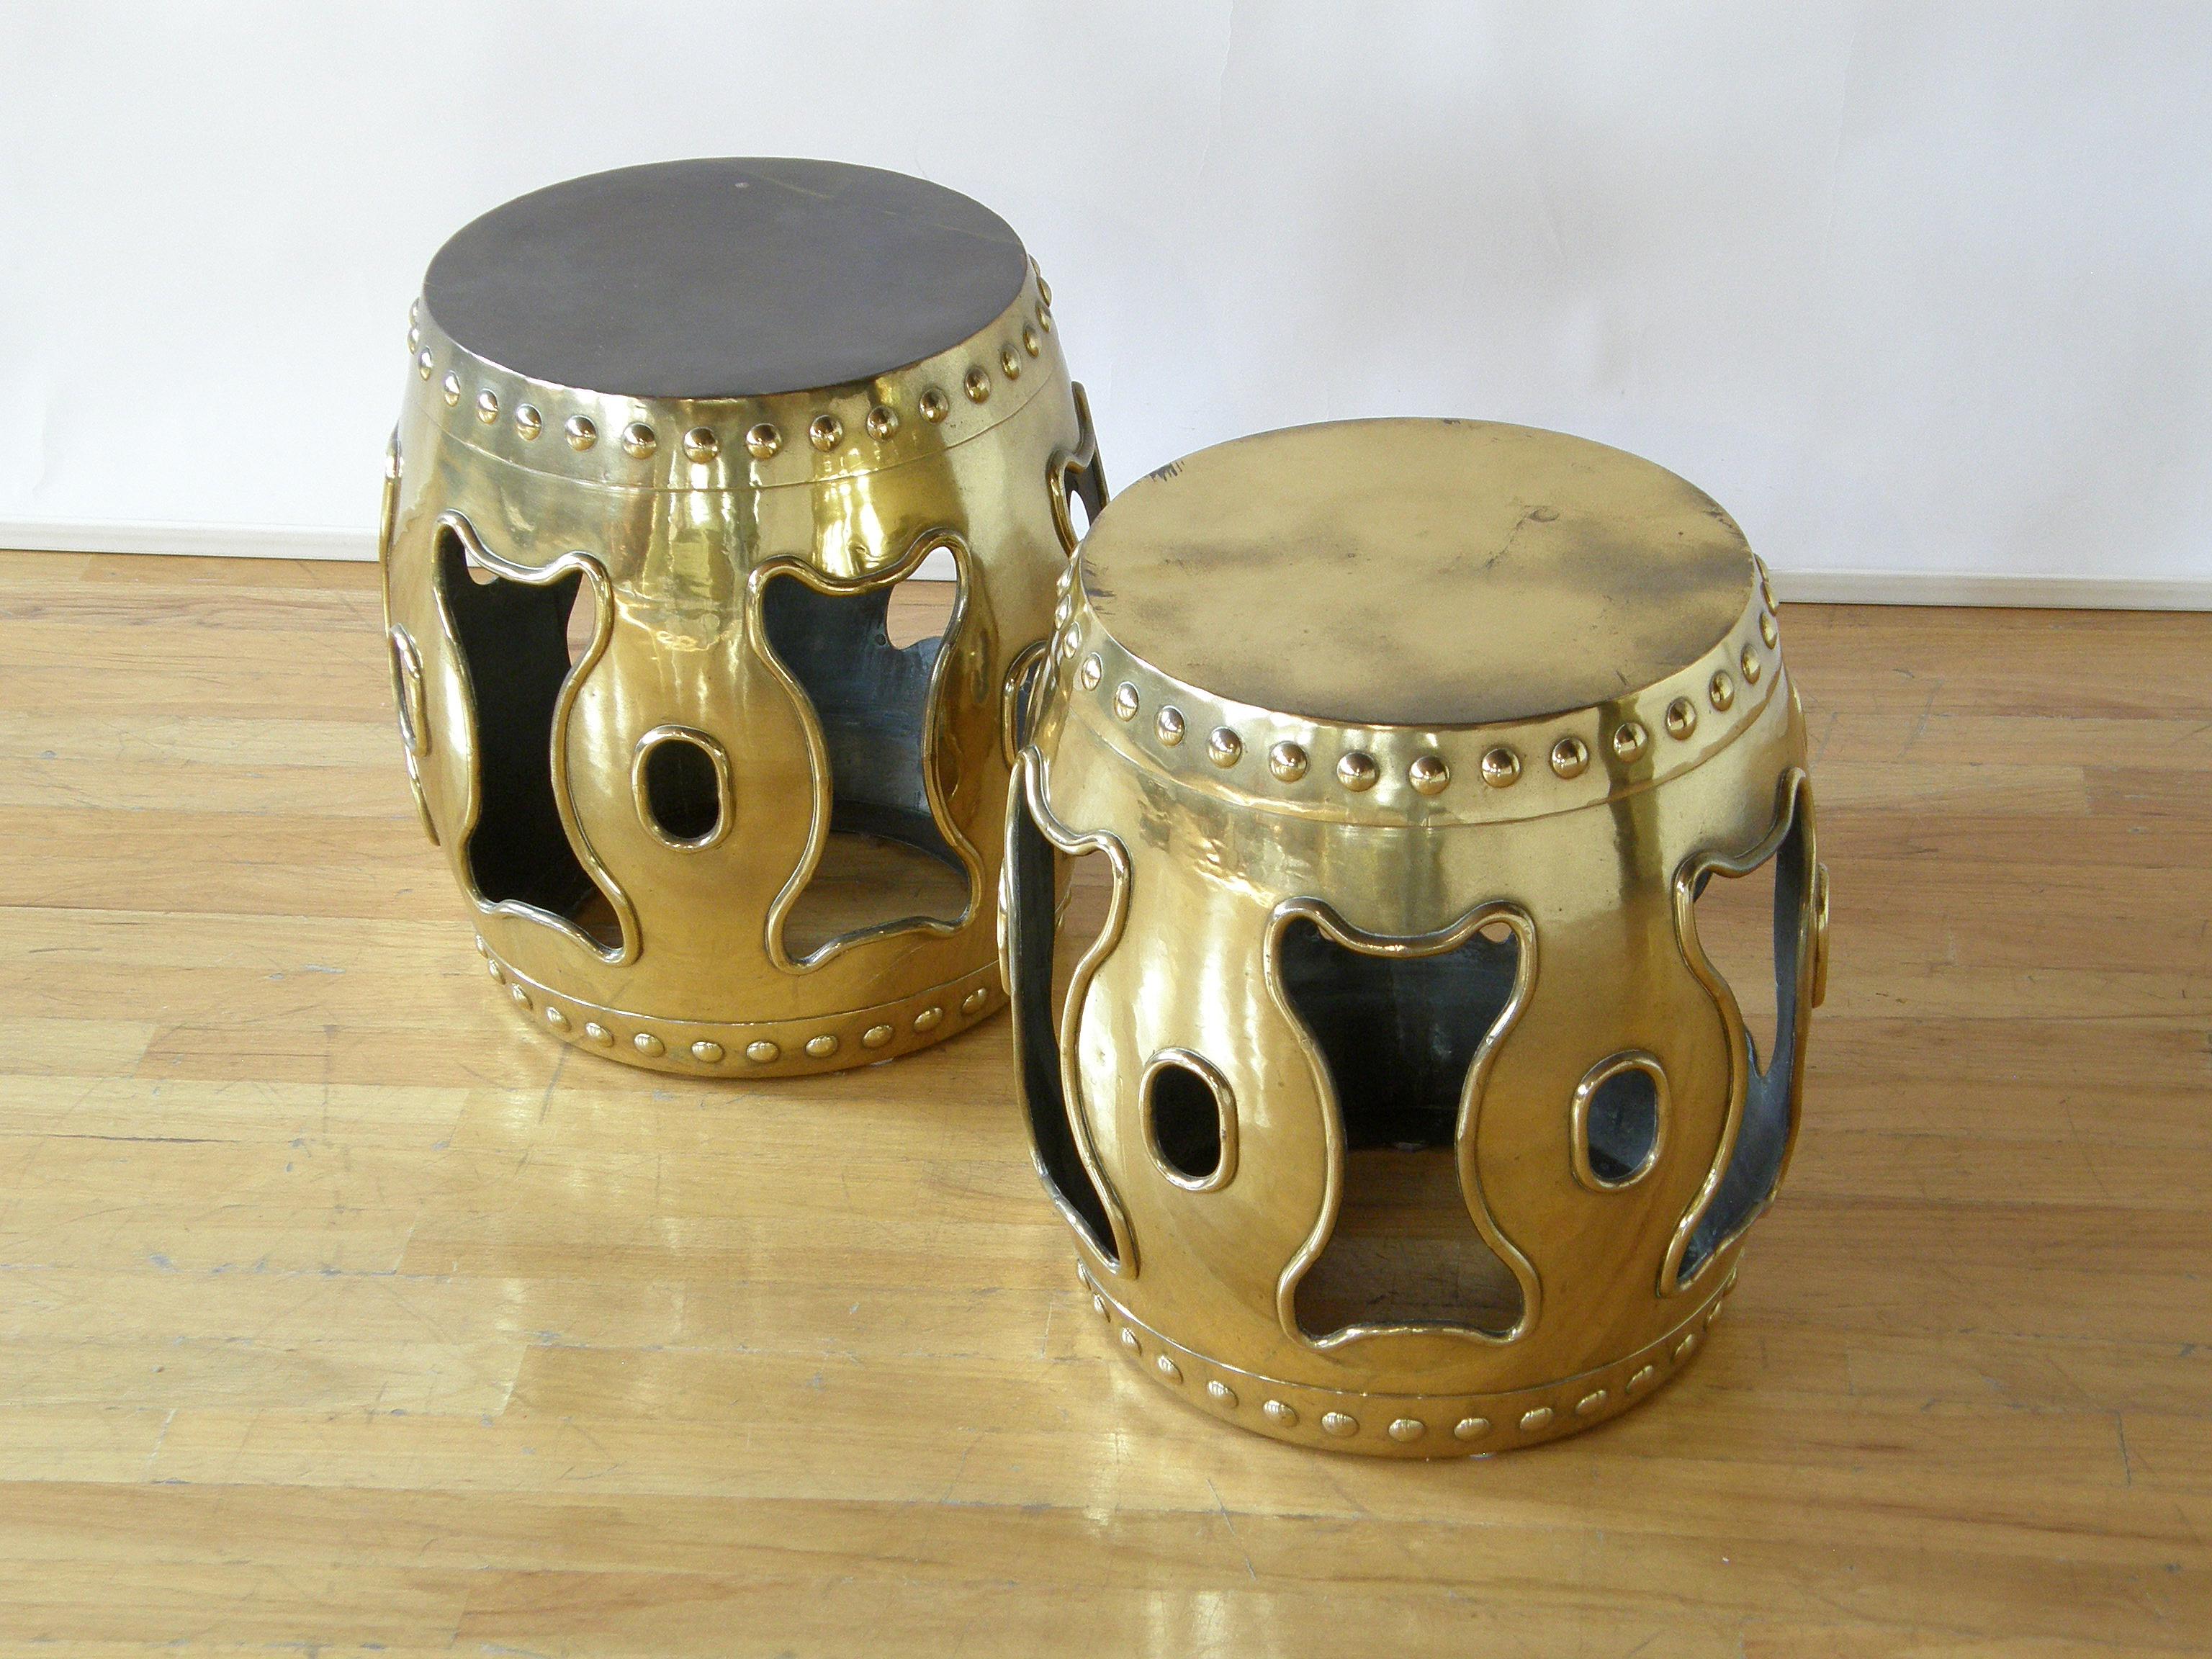 Chinoiserie Pair of Brass Drum Garden Stools Chinese Style Design with Pierced Sides